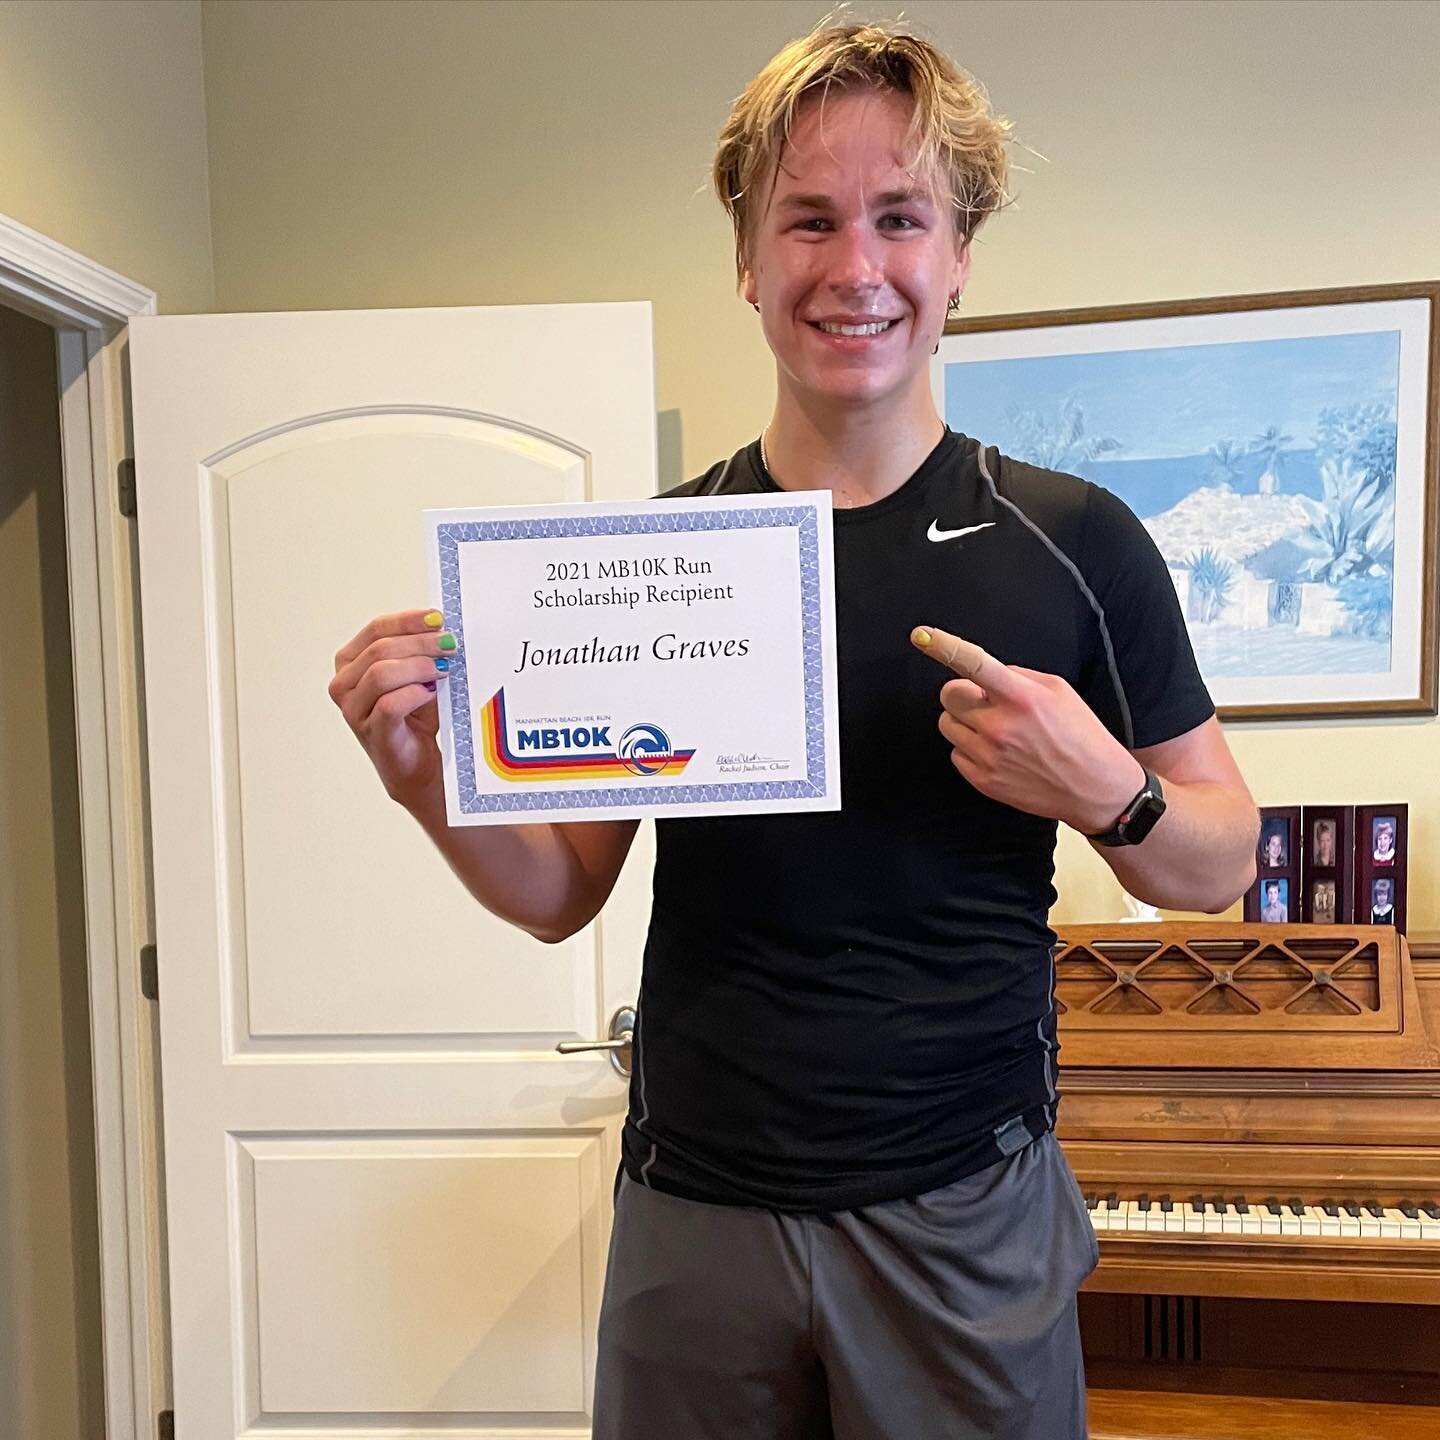 Congrats to Jonathan for being one of the MB10k Scholarship recipients! When you sign up for the 10k, proceeds are given to deserving students like him. Over the years we have given over half a million dollars to high school seniors as well as health